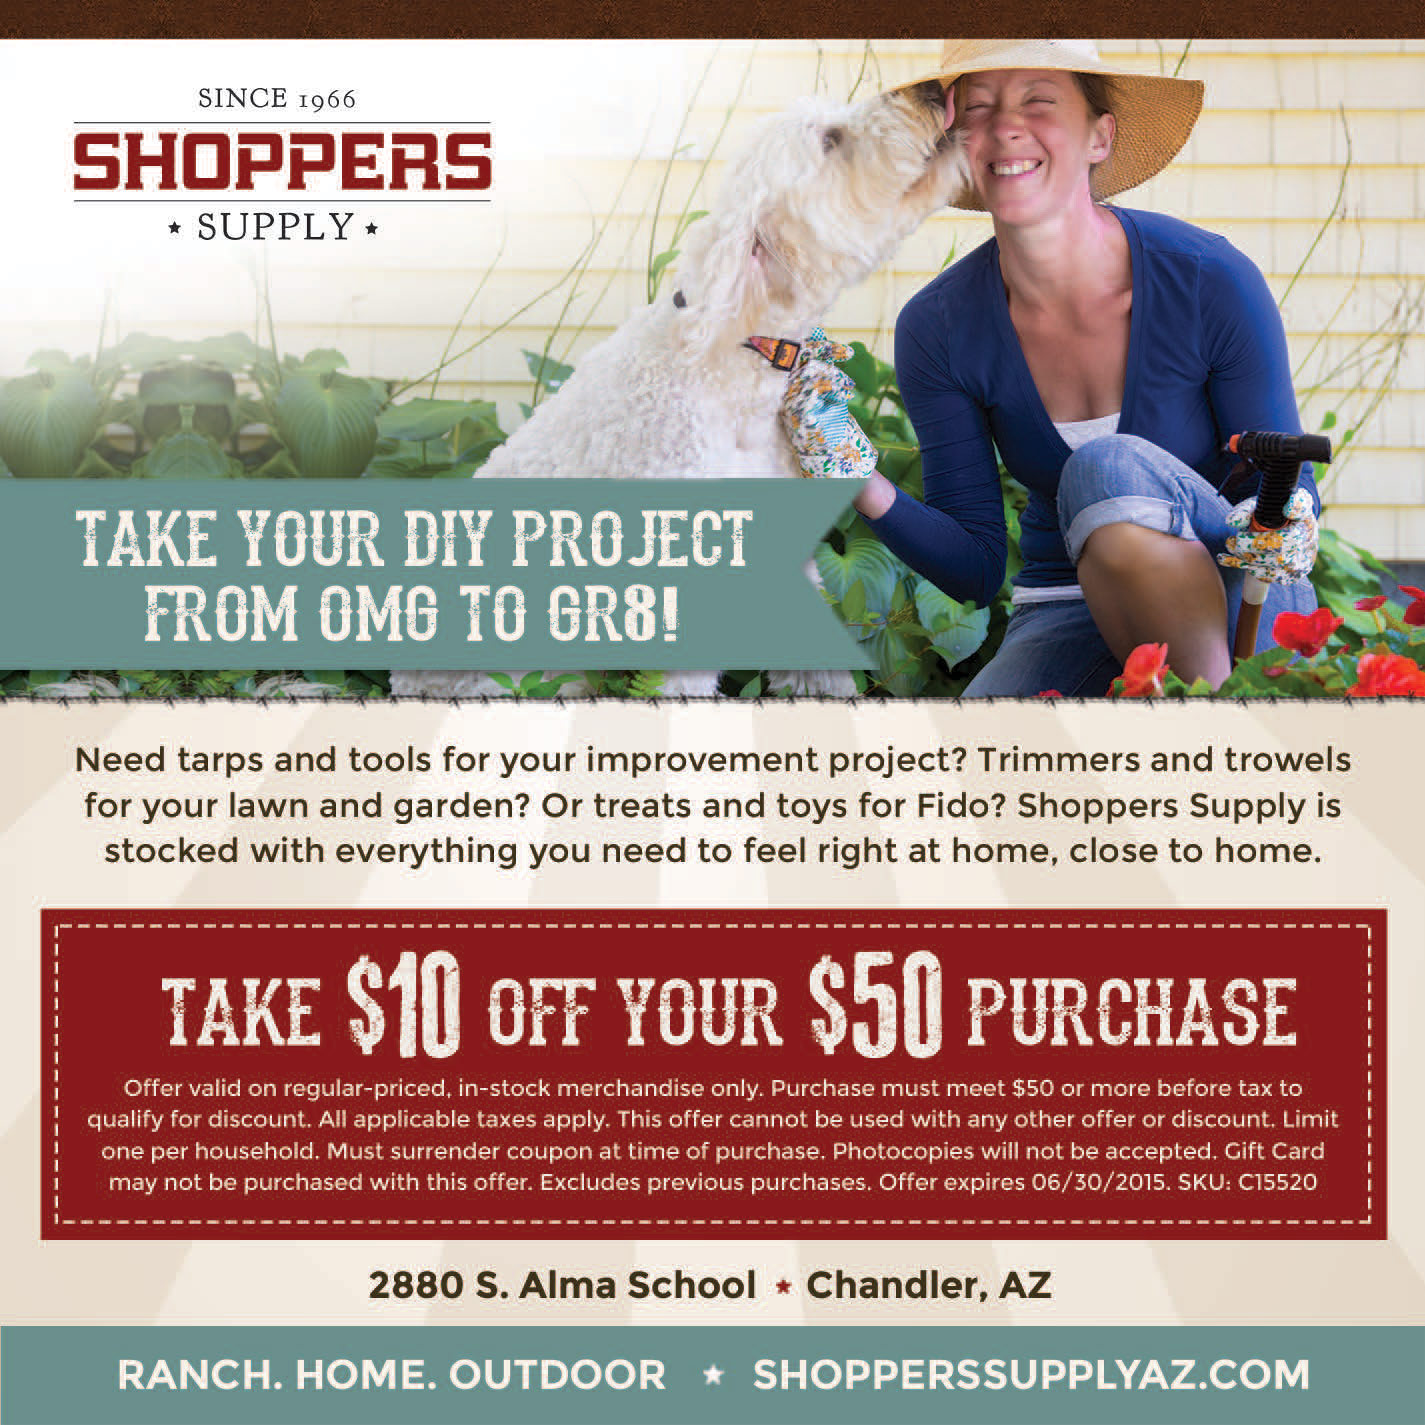 Shoppers Supply Lady Ad